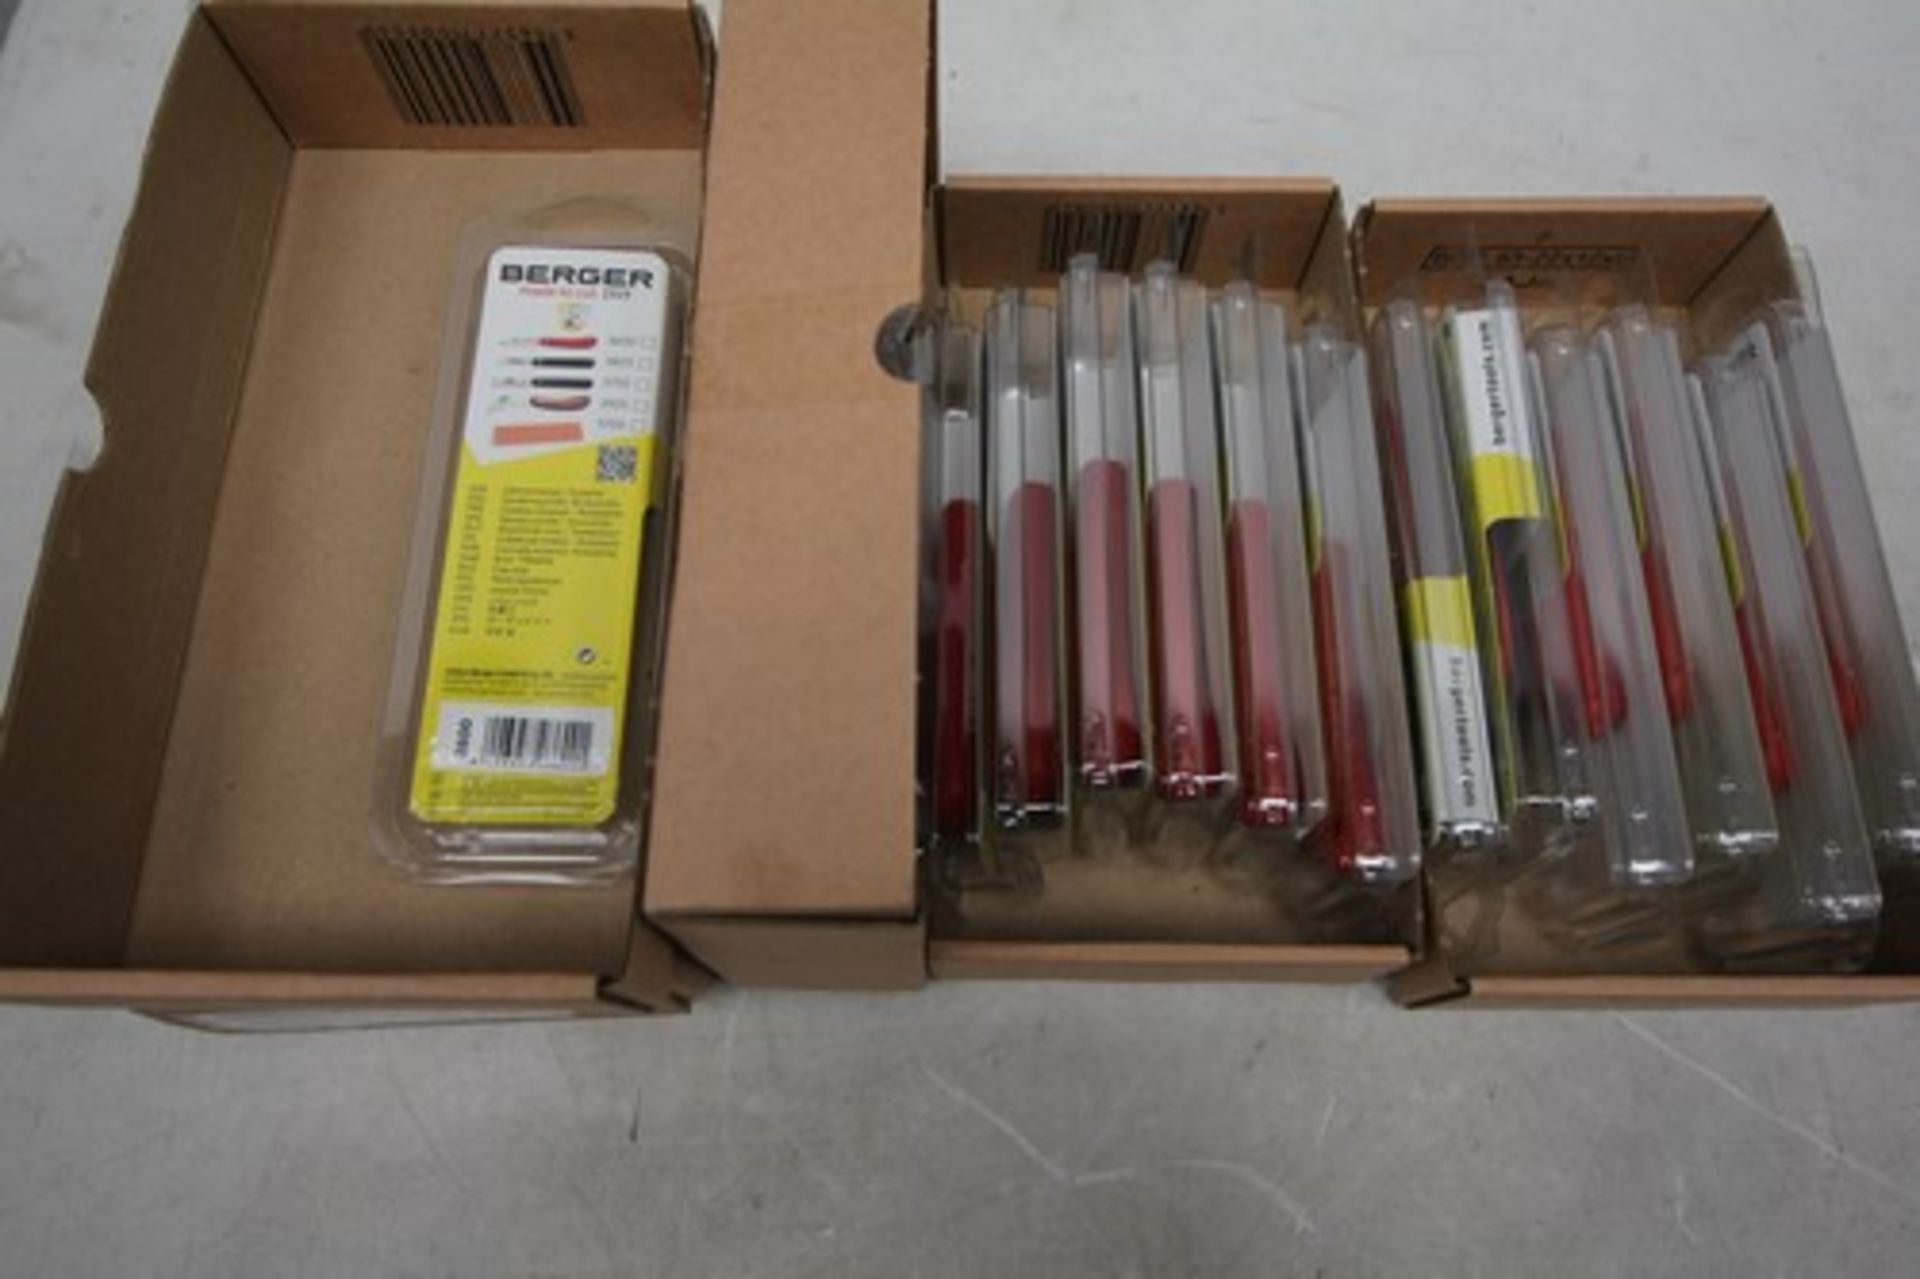 19 x Berger florist knives, code 3600 - Sealed new in pack (GS18)